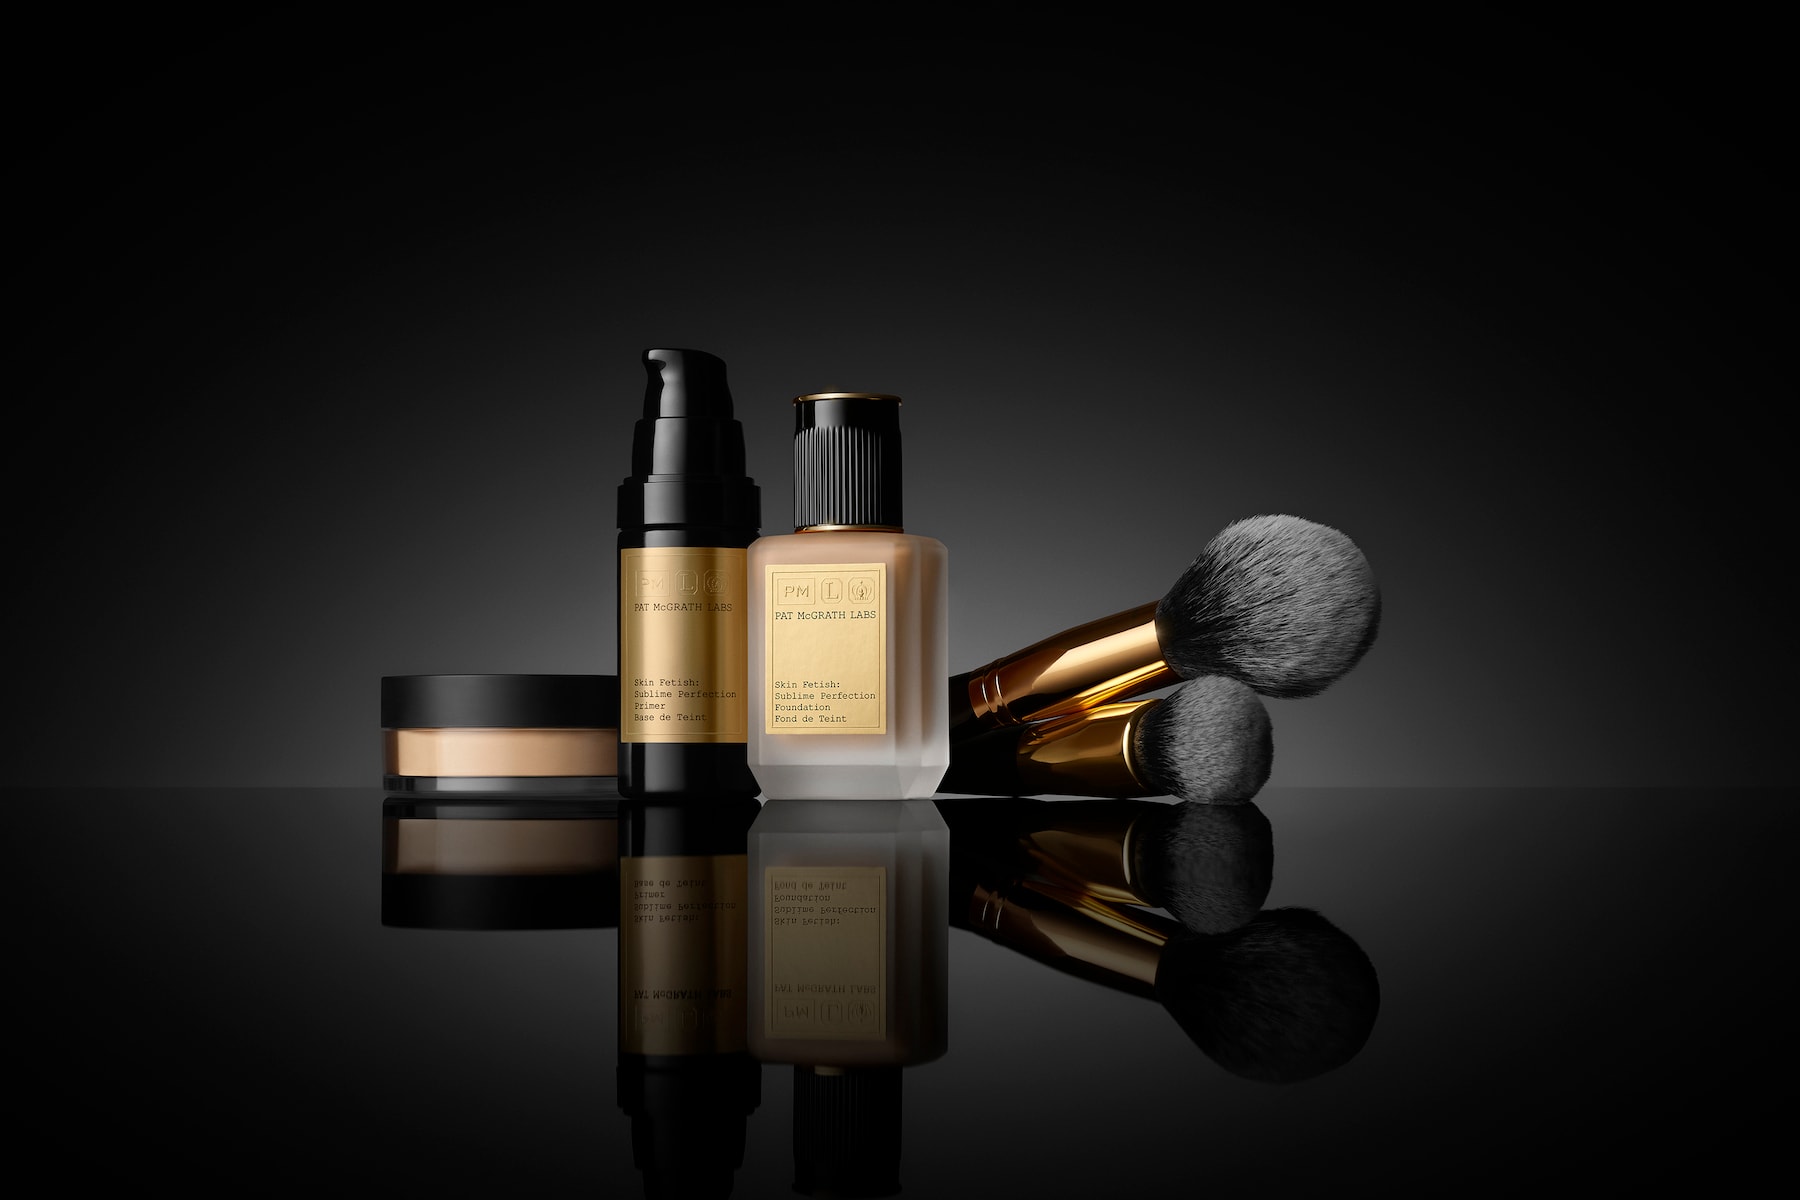 Pat McGrath Launches 36 Shades of Foundation Skin Perfecting System Primer Powder Makeup Release Date Flawless Red Carpet 